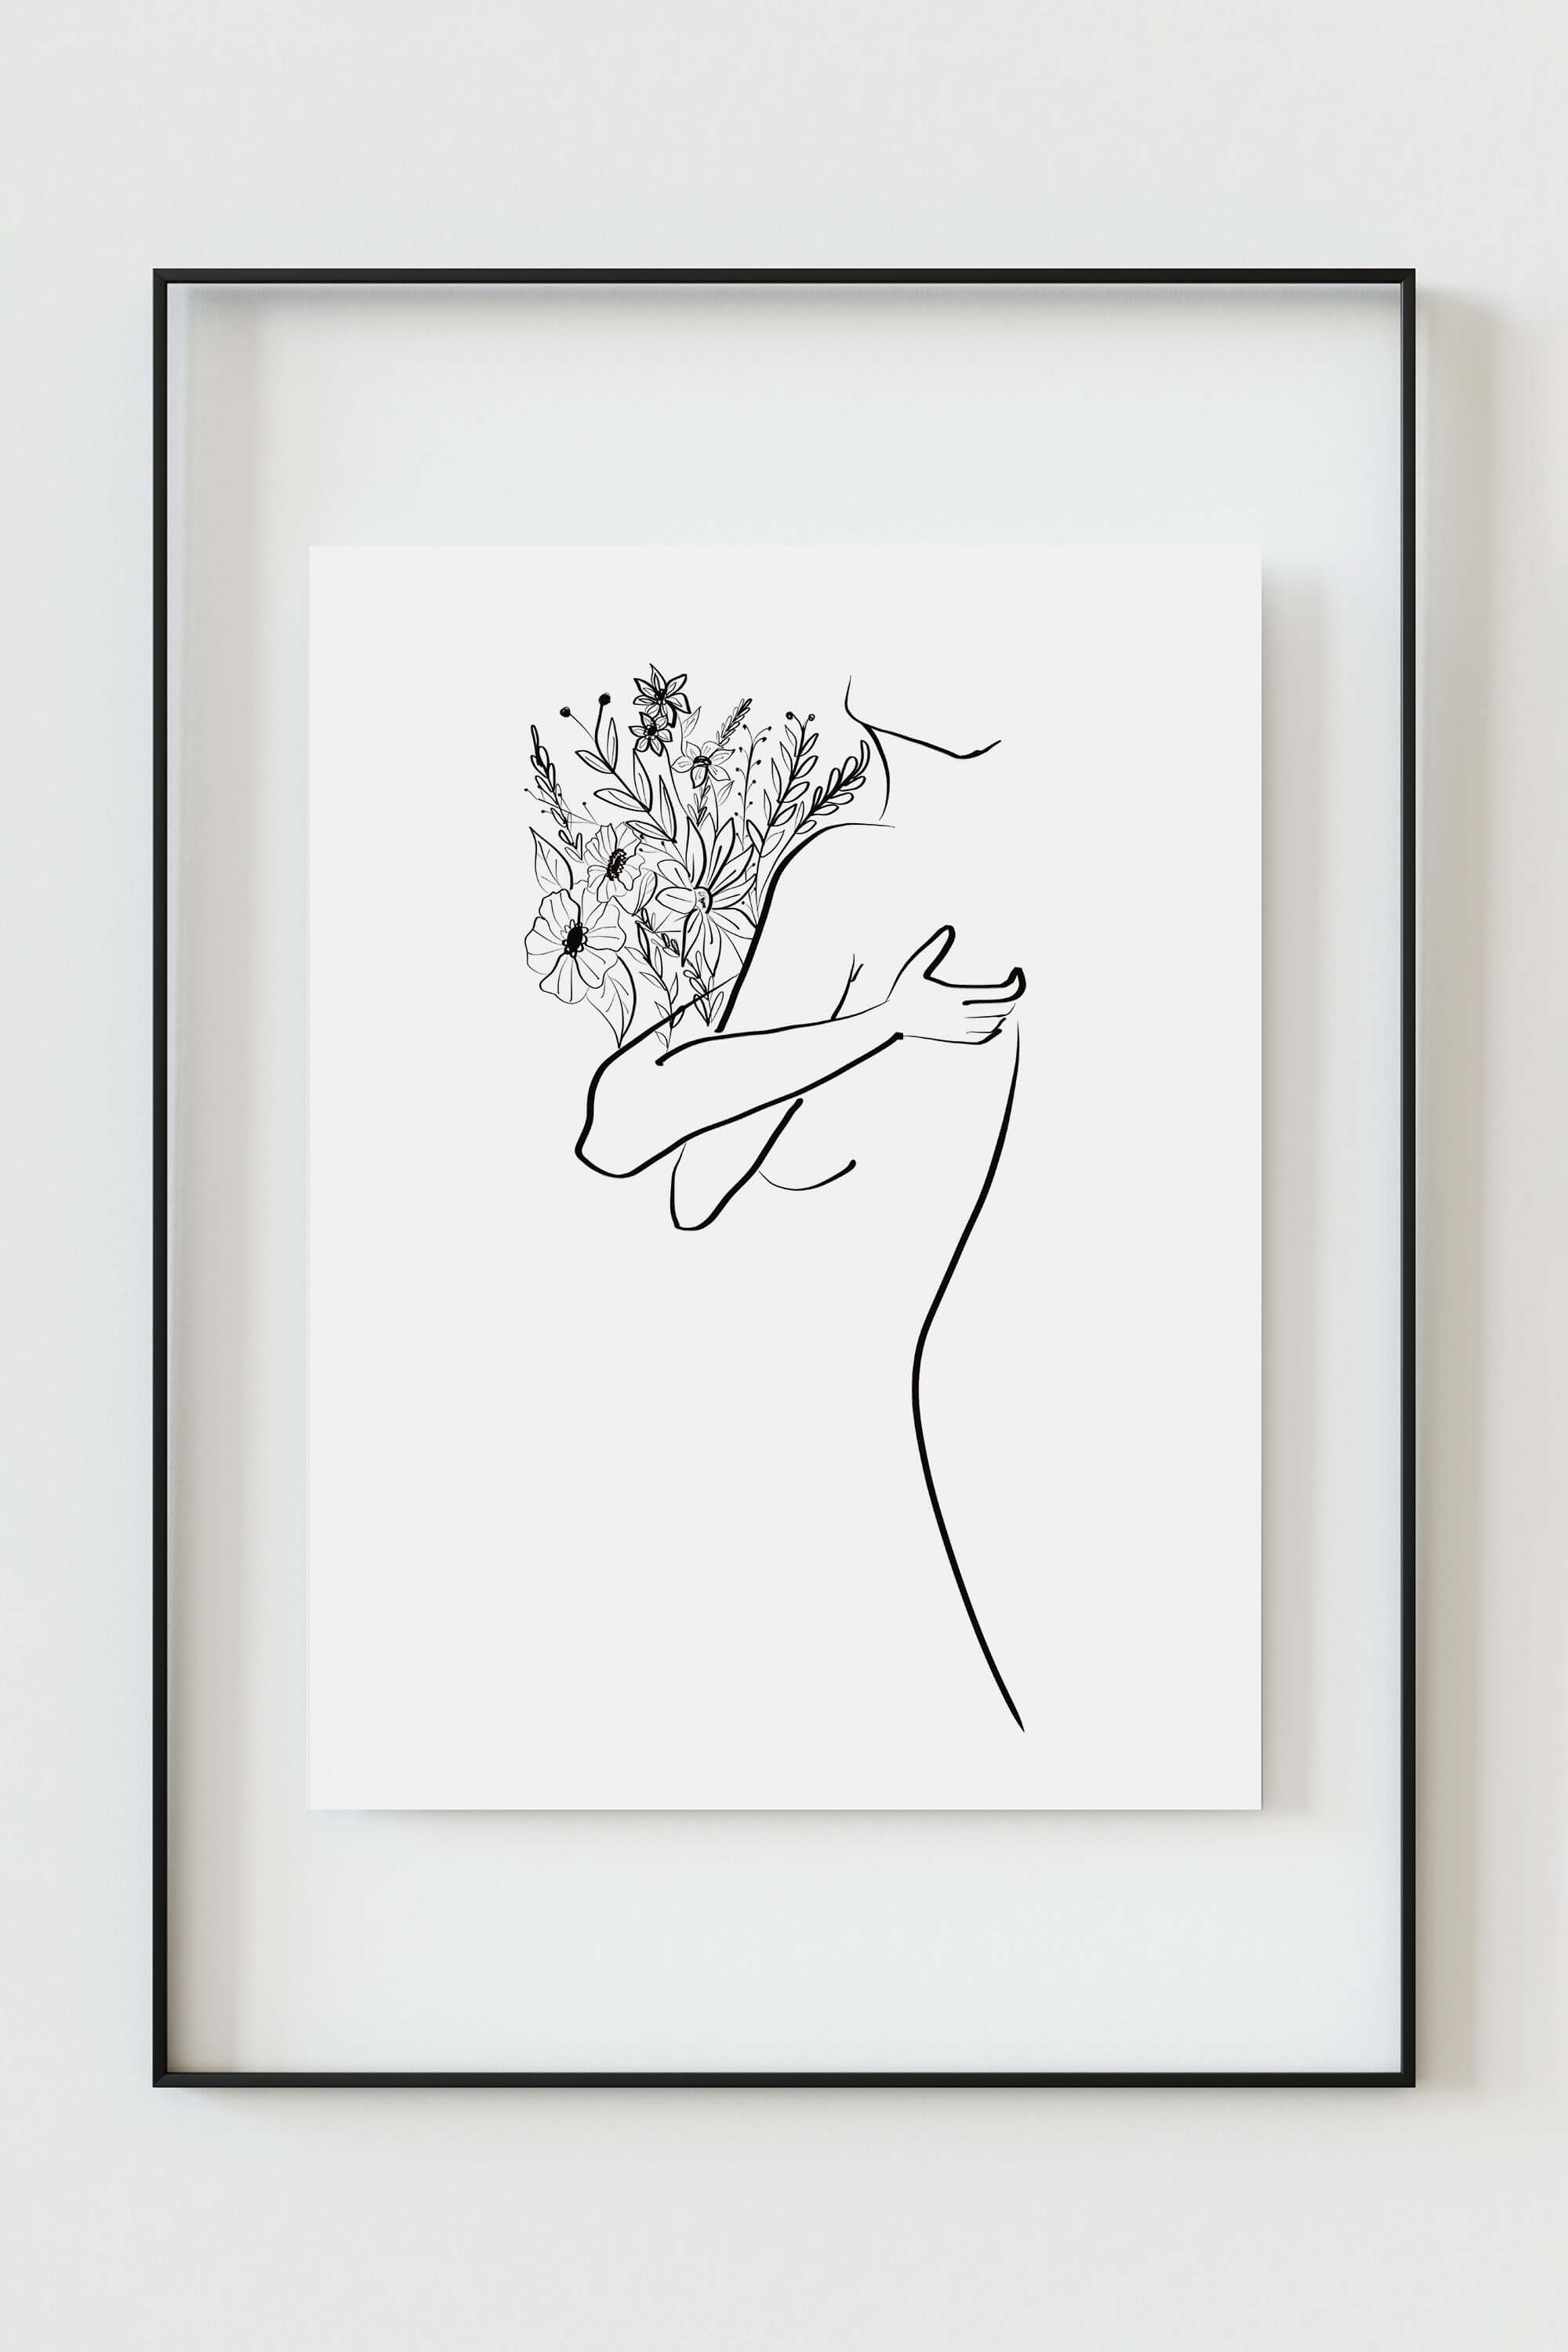 Minimalist line drawing of flowers art print, designed for bedroom decor. This black and white print blends simplicity with elegance, creating a tranquil atmosphere. Ideal for those seeking a modern touch with nature-inspired elements.